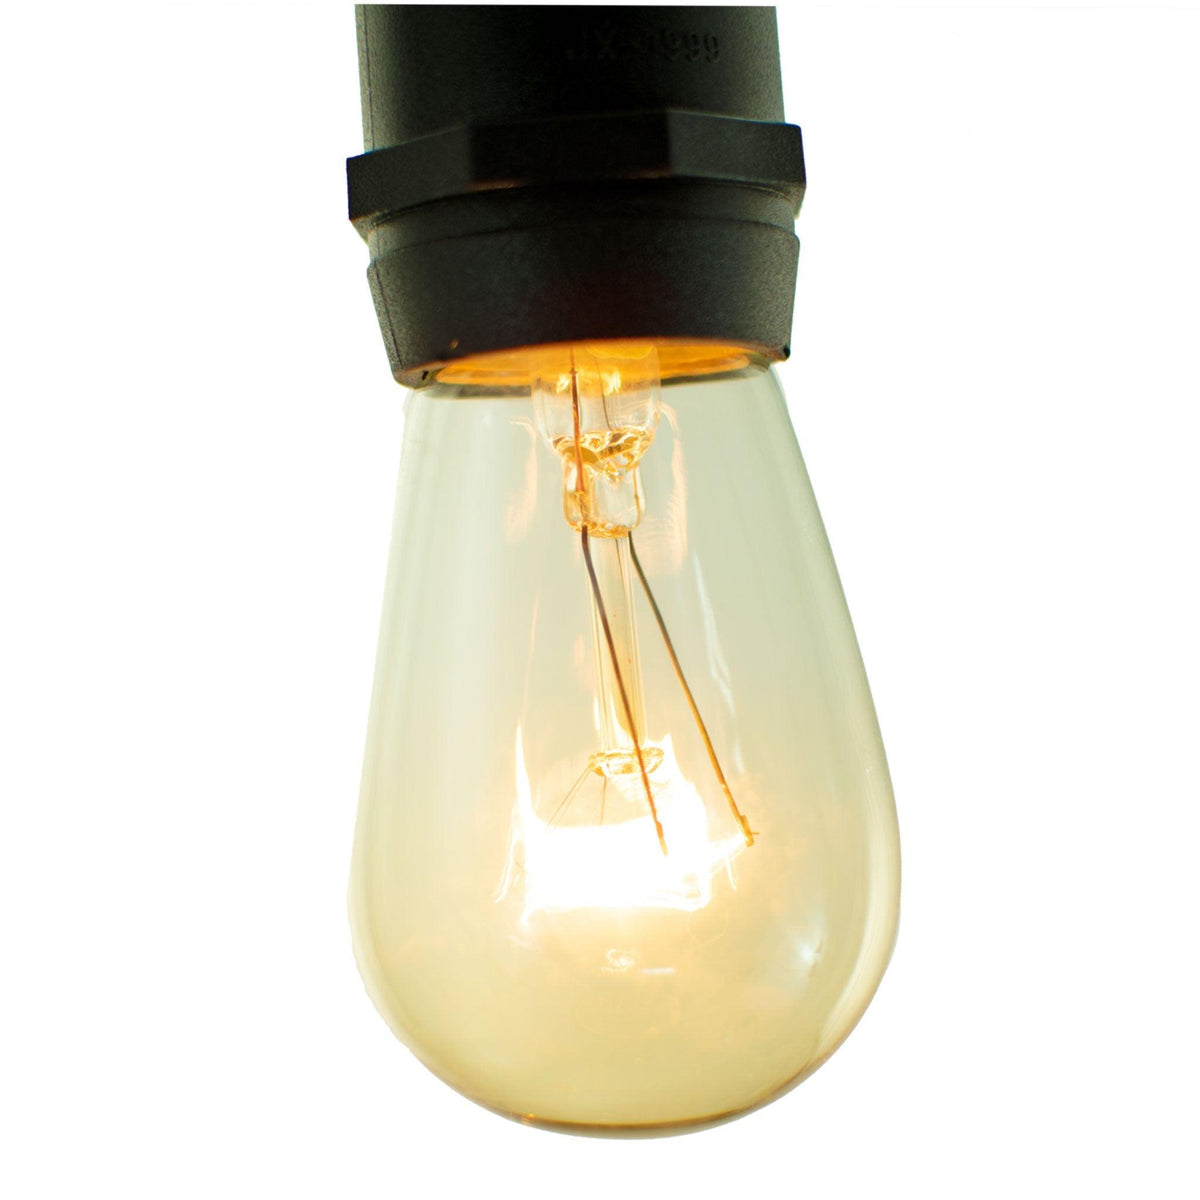 Purchase a box of brand new Edison Light Bulbs from Lee Display!  Clear Warm White Incandescent S14 Replacement Bulbs on sale at leedisplay.com